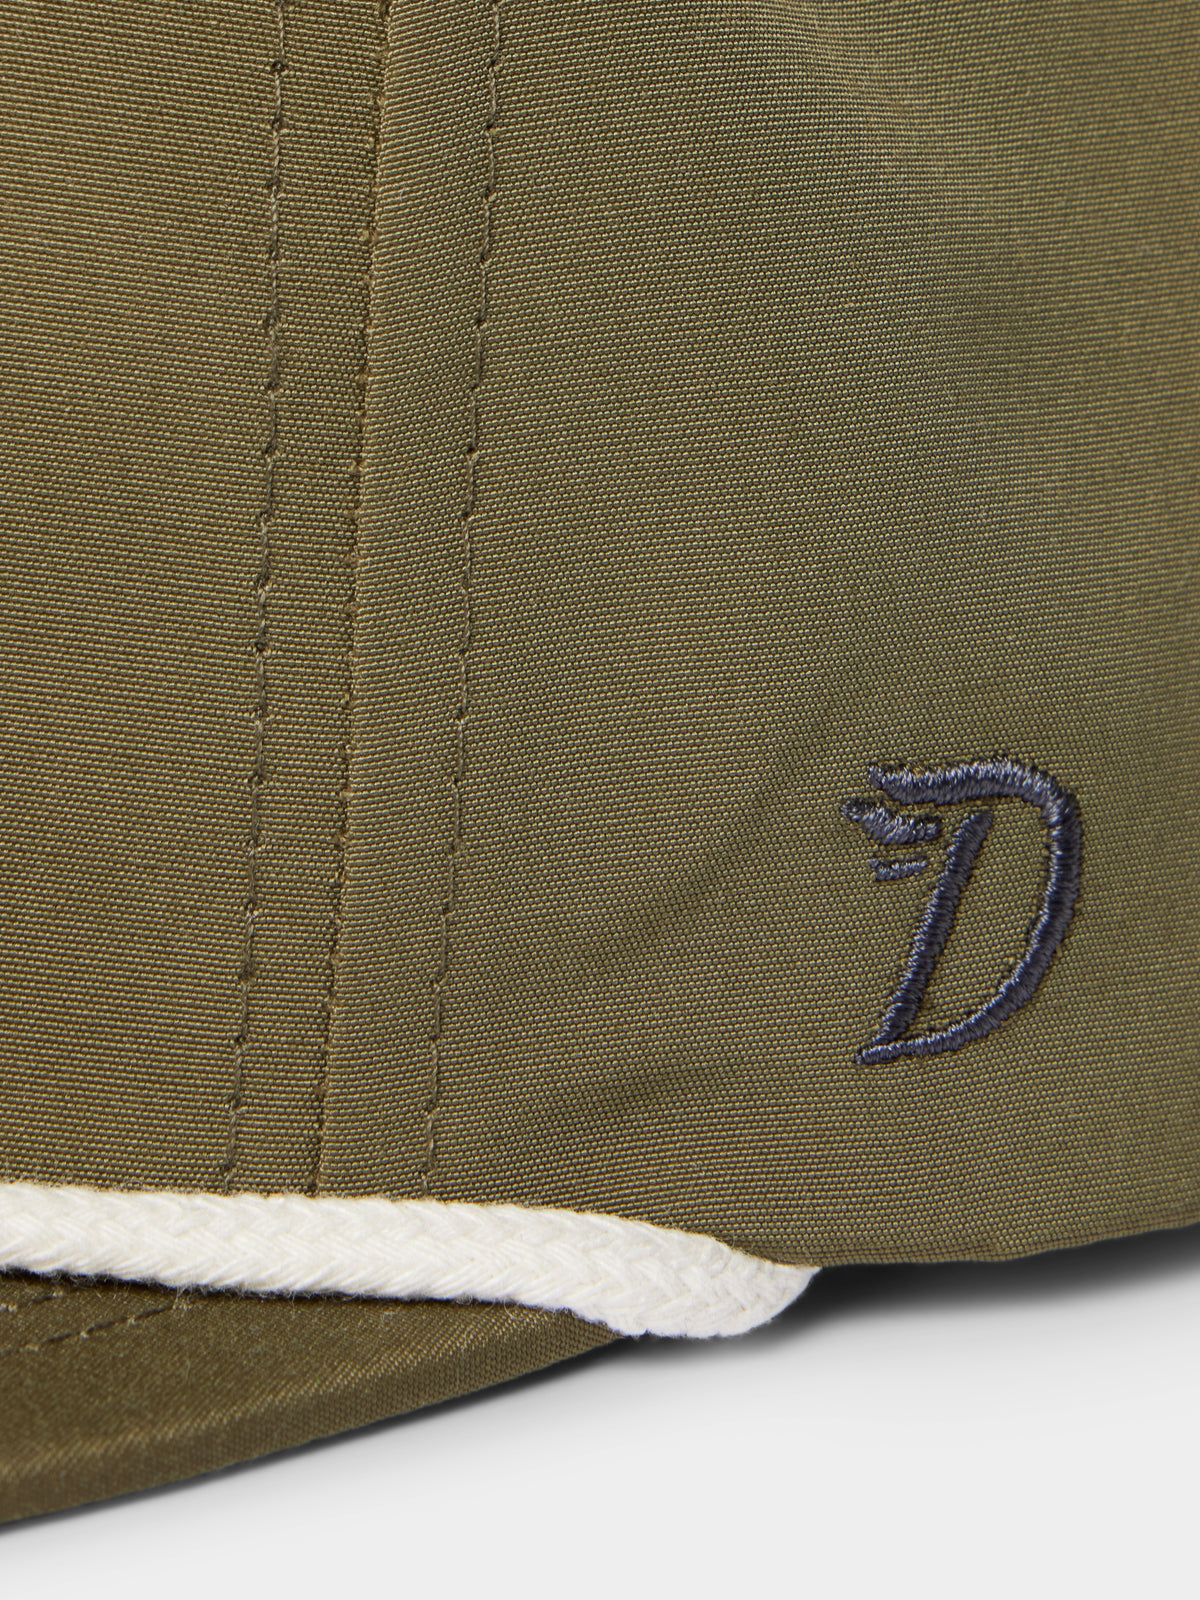 Blue Crab Hat - Dusty Olive – Duck Camp